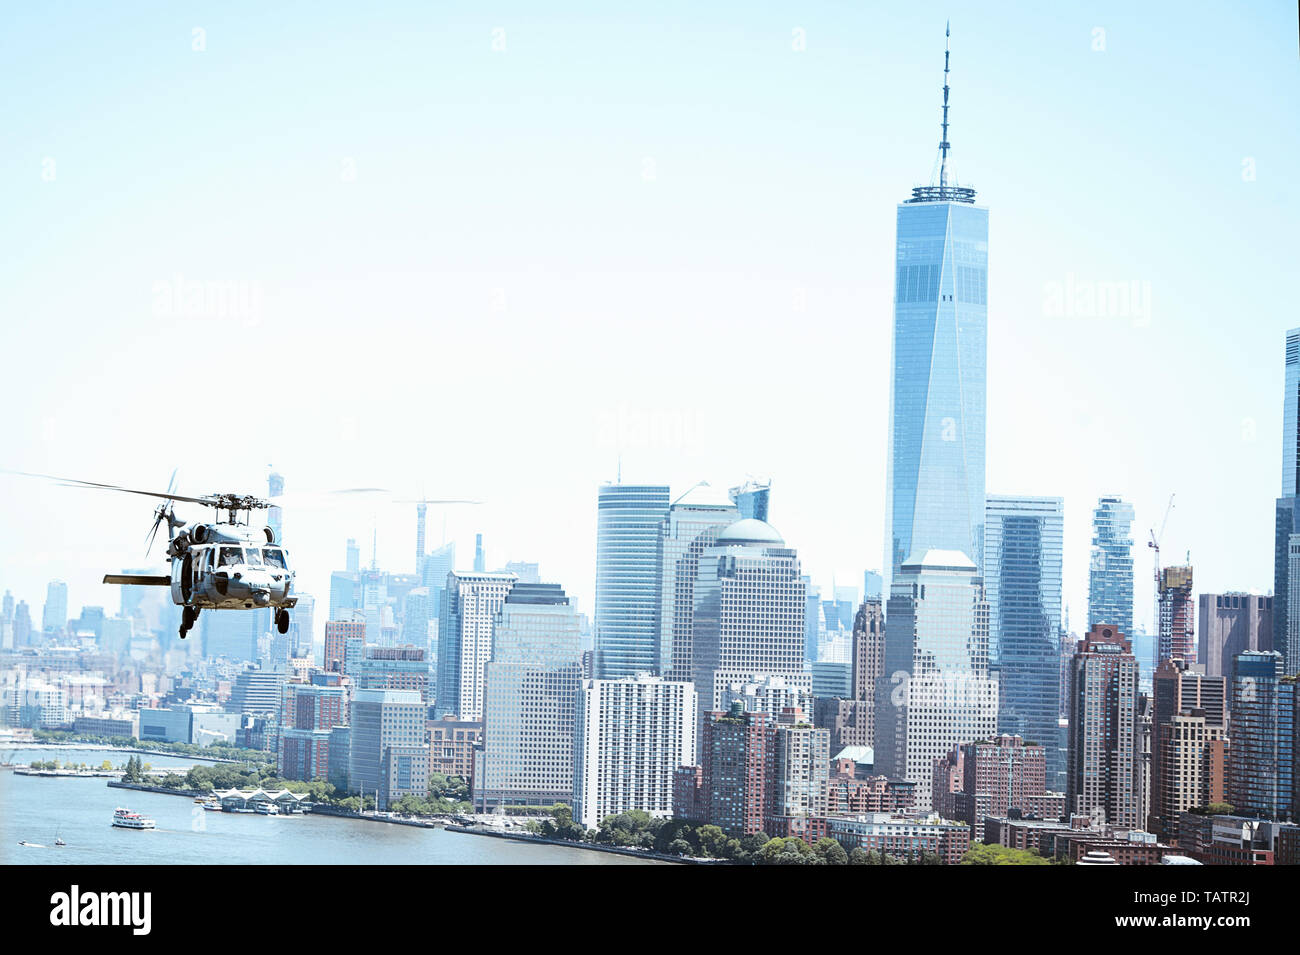 190526-N-XQ474-1196 NEW YORK (May 26, 2019) An MH-60S Sea Hawk helicopter assigned to the 'Tridents' of Helicopter Sea Combat Squadron (HSC) 9 flies over New York City during Fleet Week New York. Fleet Week New York, now in its 31st year, is the city's time-honored celebration of the sea services. It is an unparalleled opportunity for the citizens of New York and the surrounding tri-state area to meet Sailors, Marines and Coast Guardsmen, as well as witness firsthand the latest capabilities of today's maritime services. (U.S. Navy photo by Mass Communication Specialist 2nd Class Andrew Schneid Stock Photo